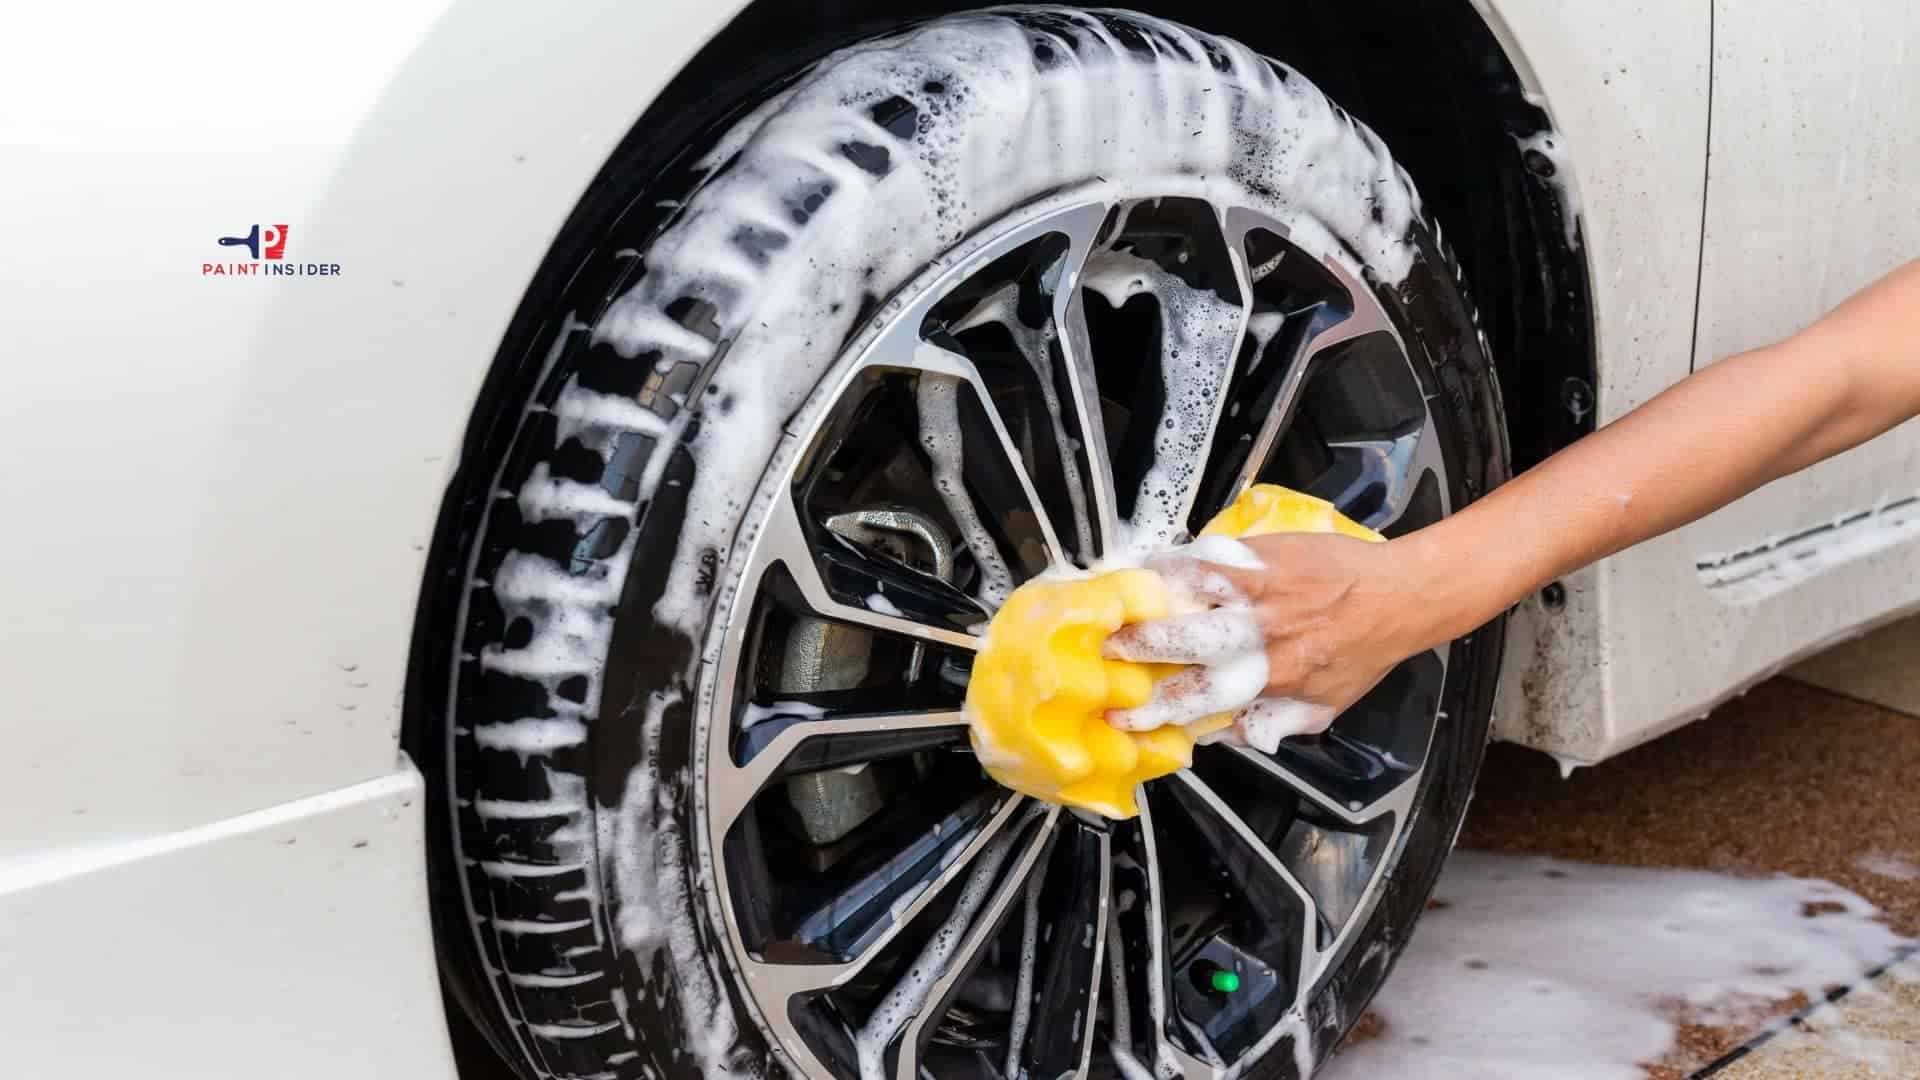 How To Remove Spray Paint From Wheels